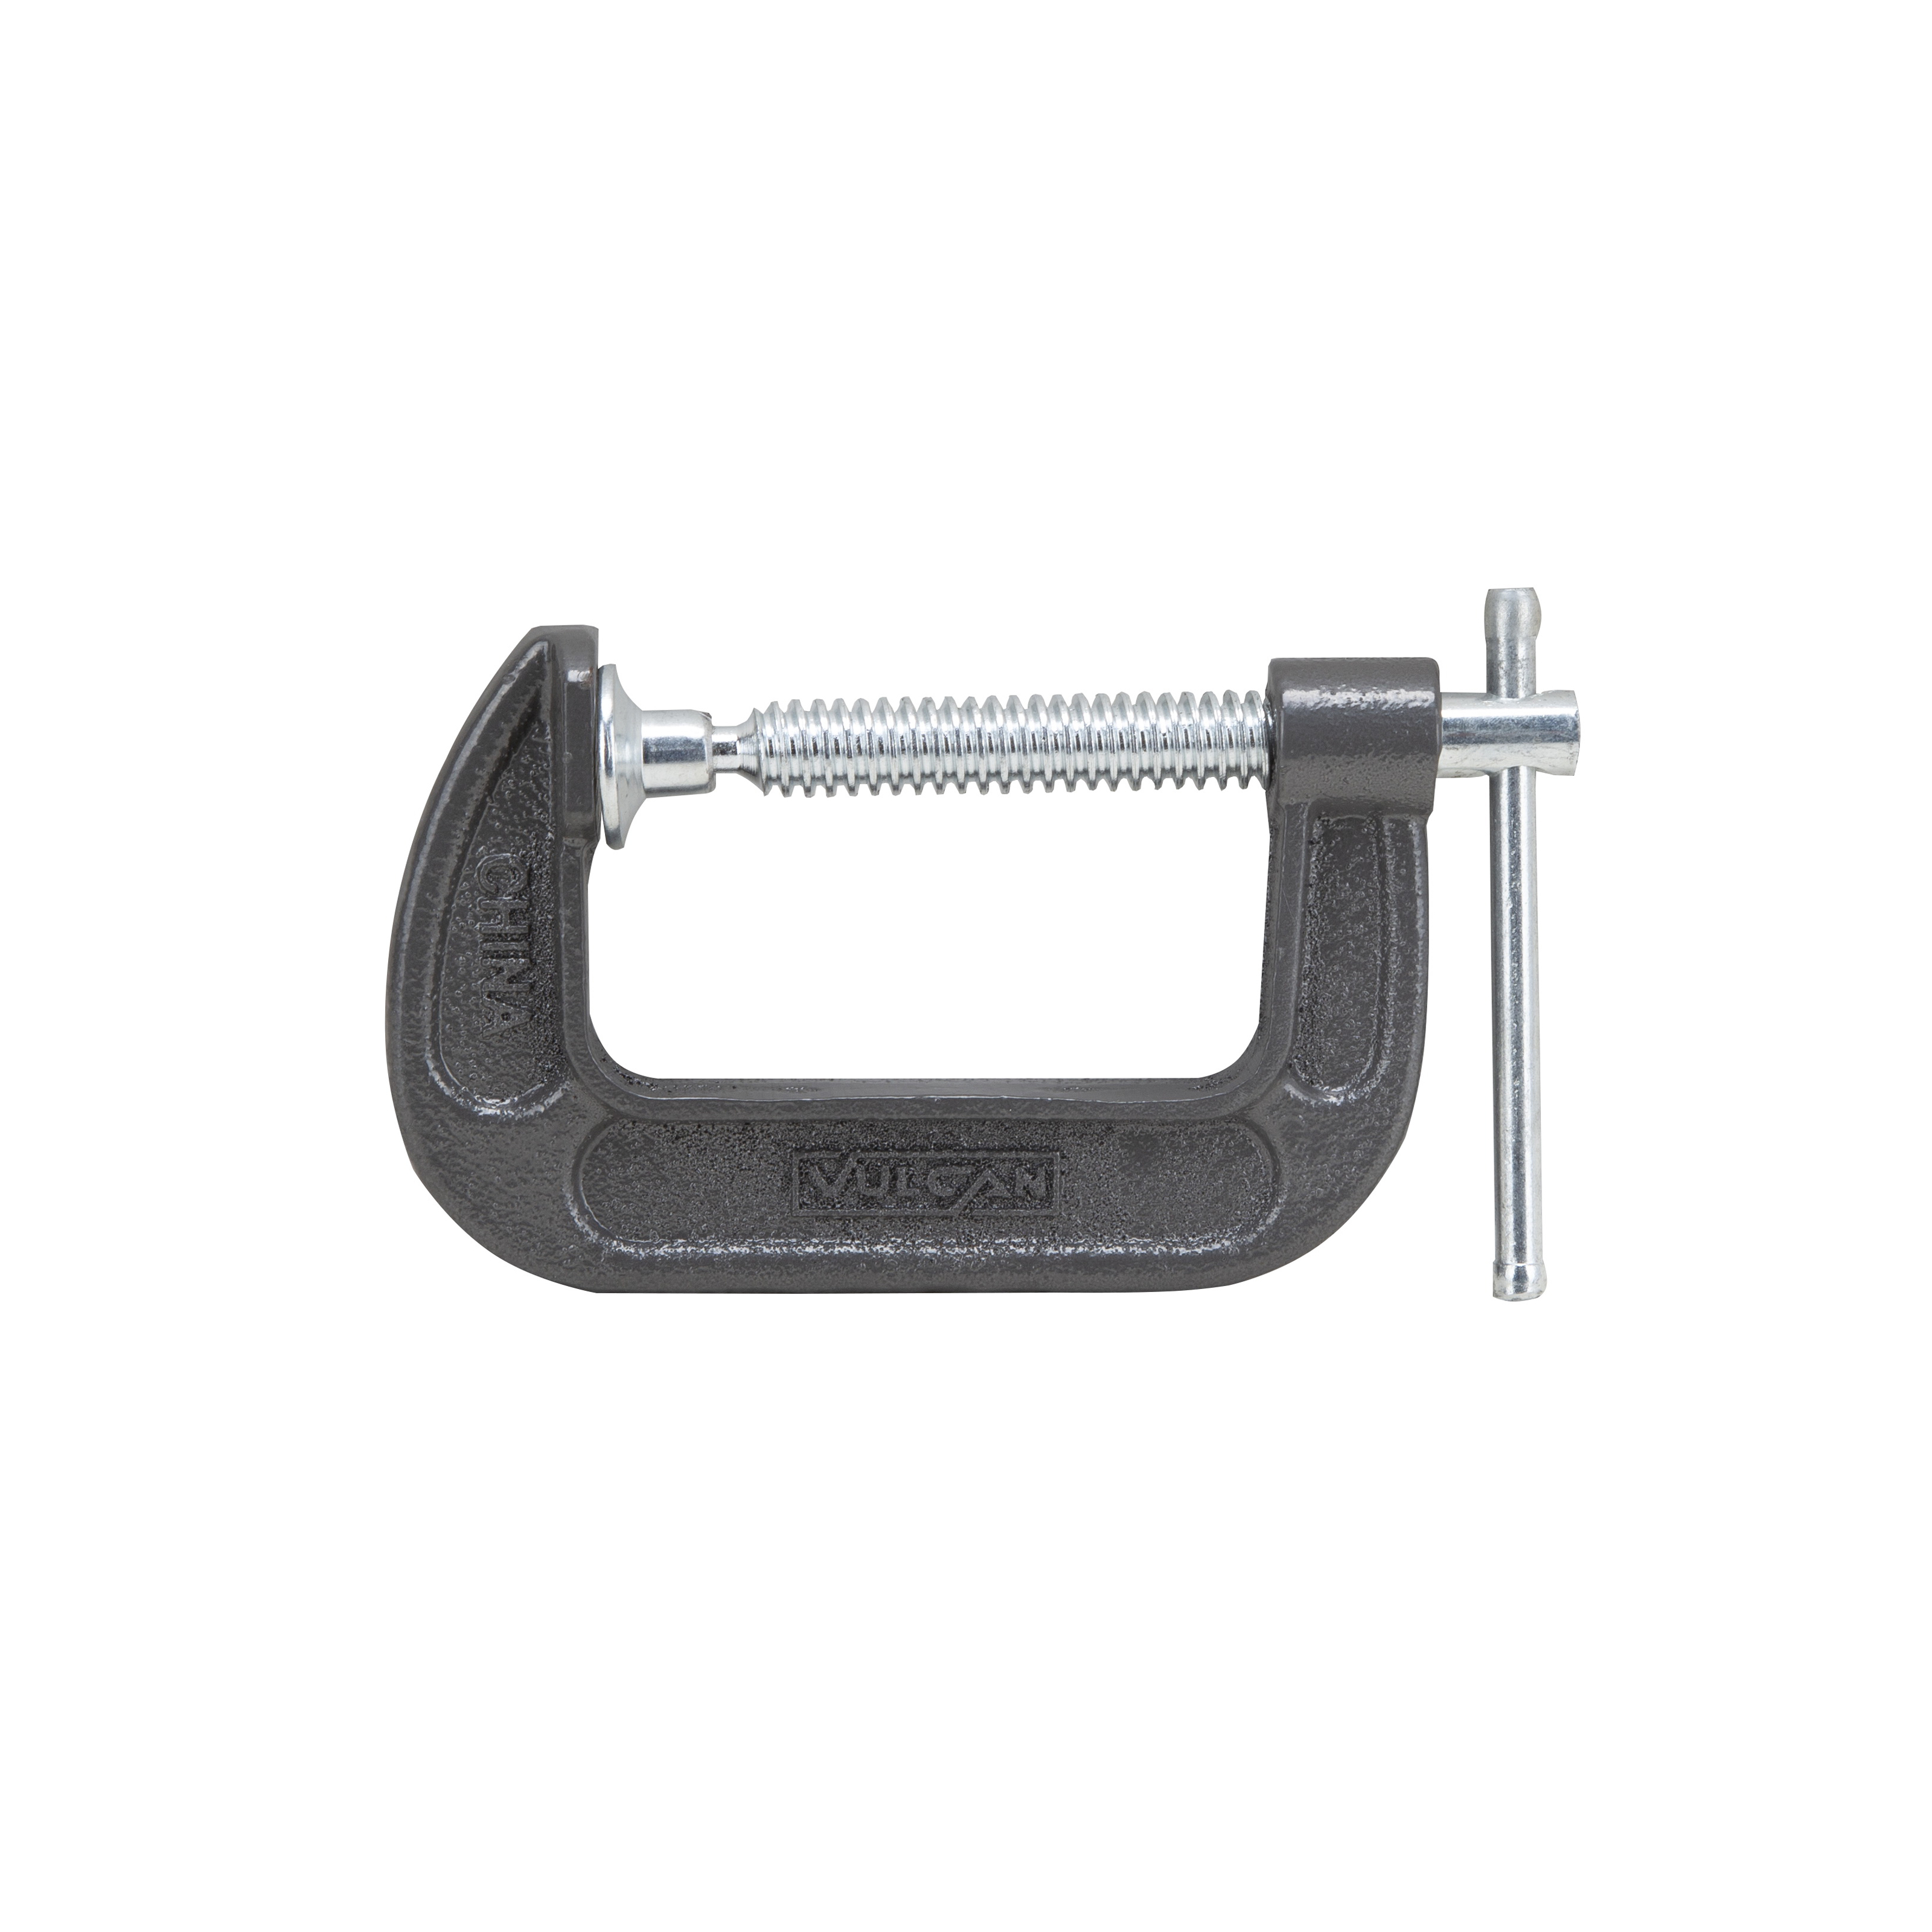 JL27362 C-Clamp, 3 in Max Opening Size, 1-3/4 in D Throat, Steel Body, Gray Body